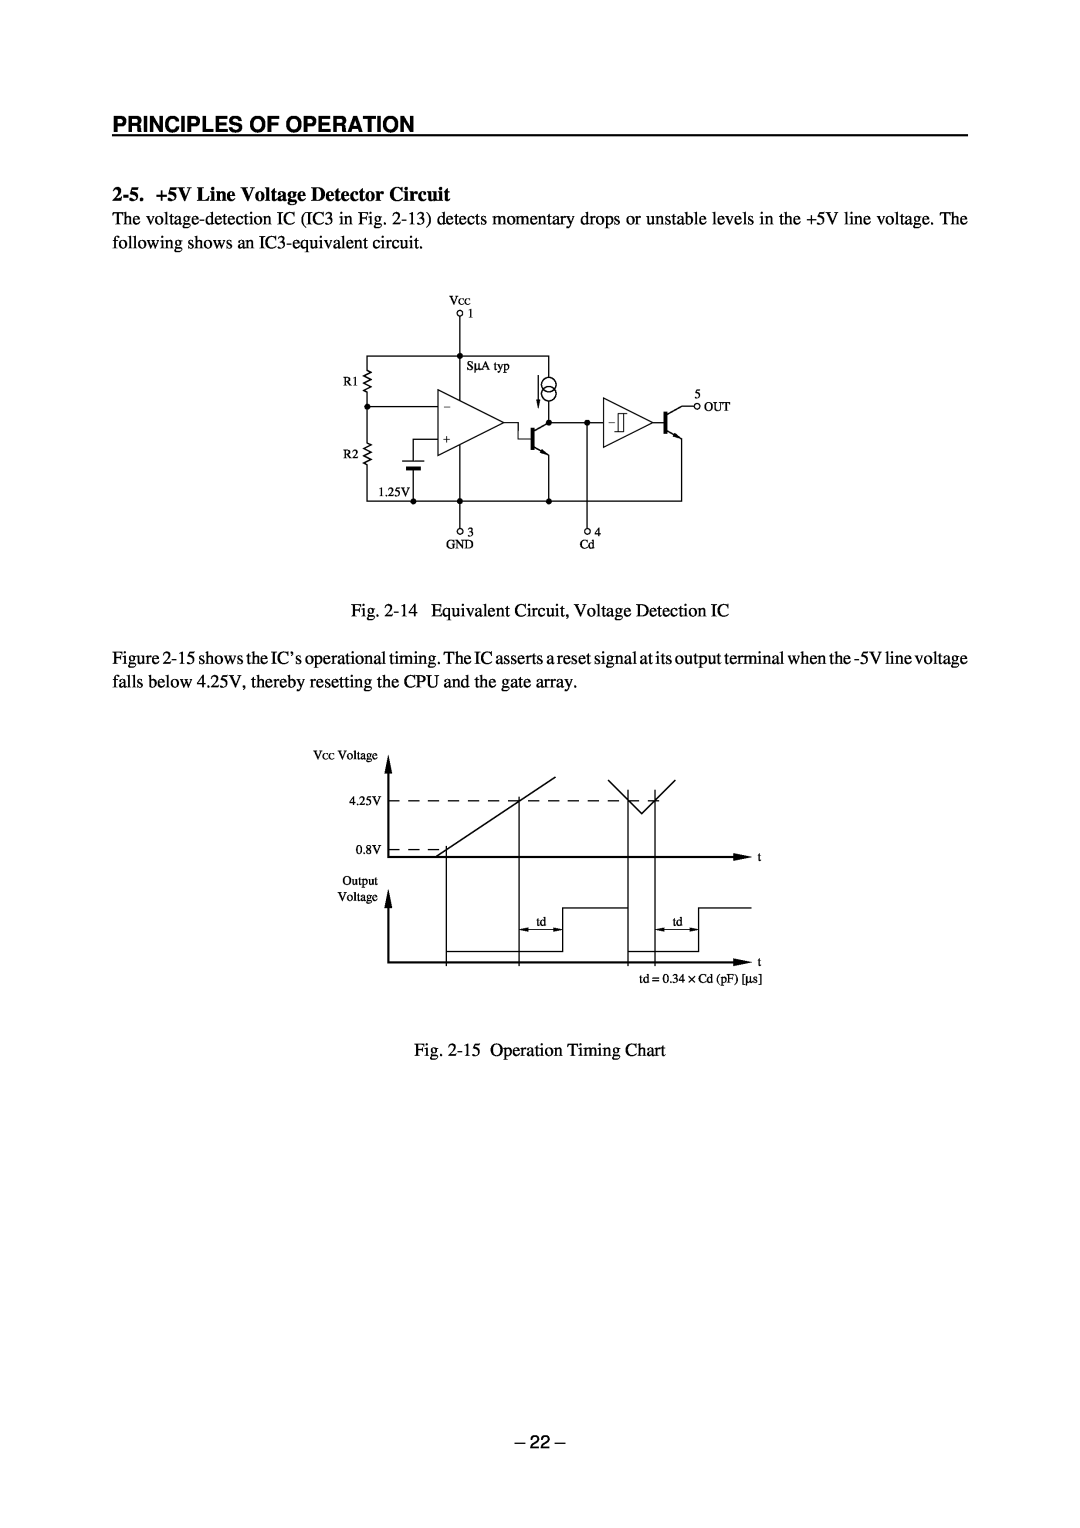 Star Micronics TSP200 technical manual 2-5. +5V Line Voltage Detector Circuit, Principles Of Operation 